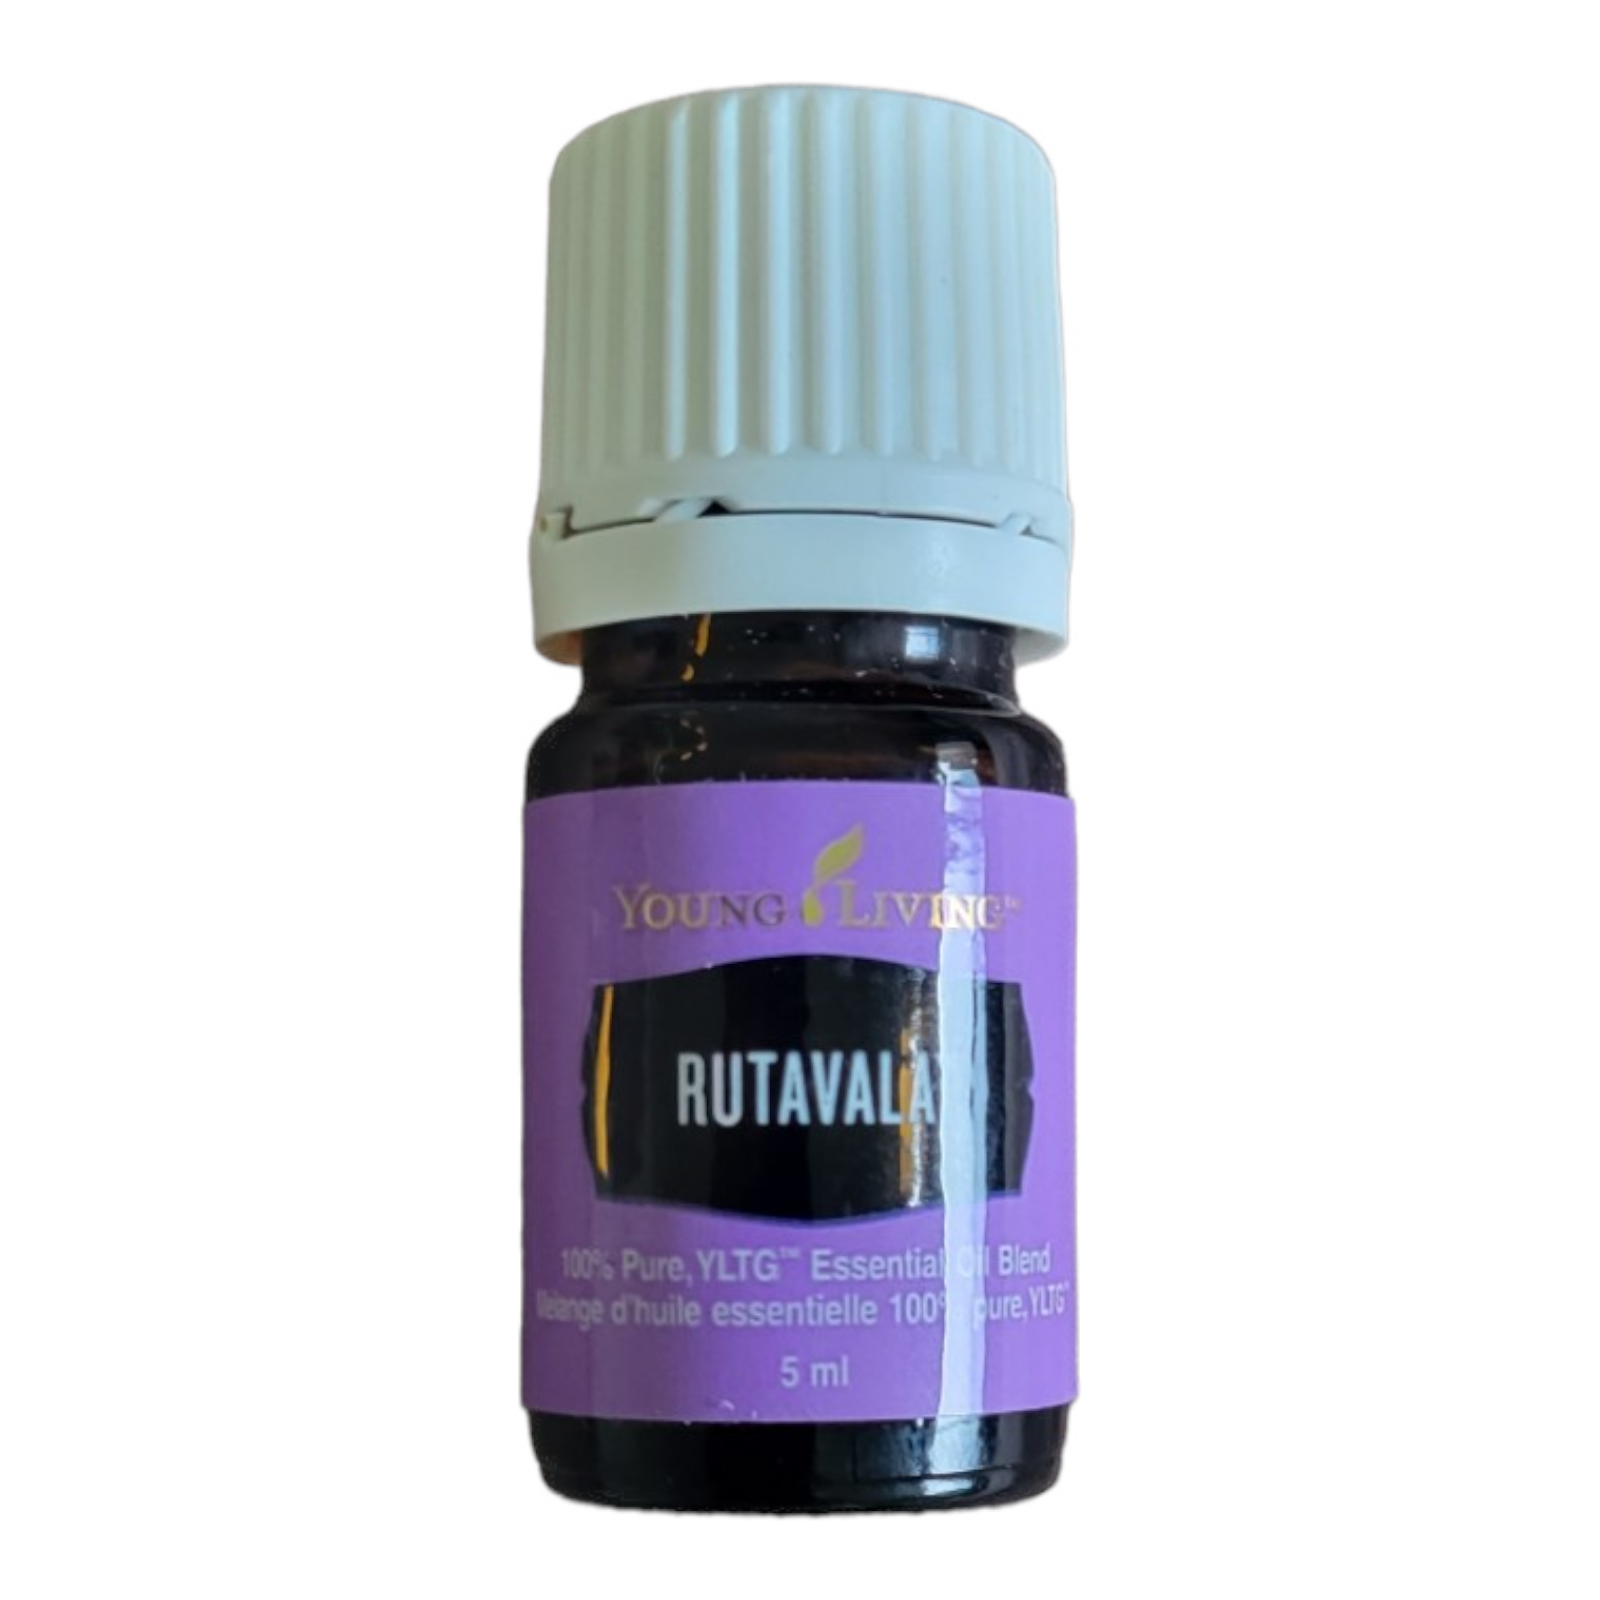 Primary image for Young Living Rutavala Oil (5 ml) - New - Free Shipping